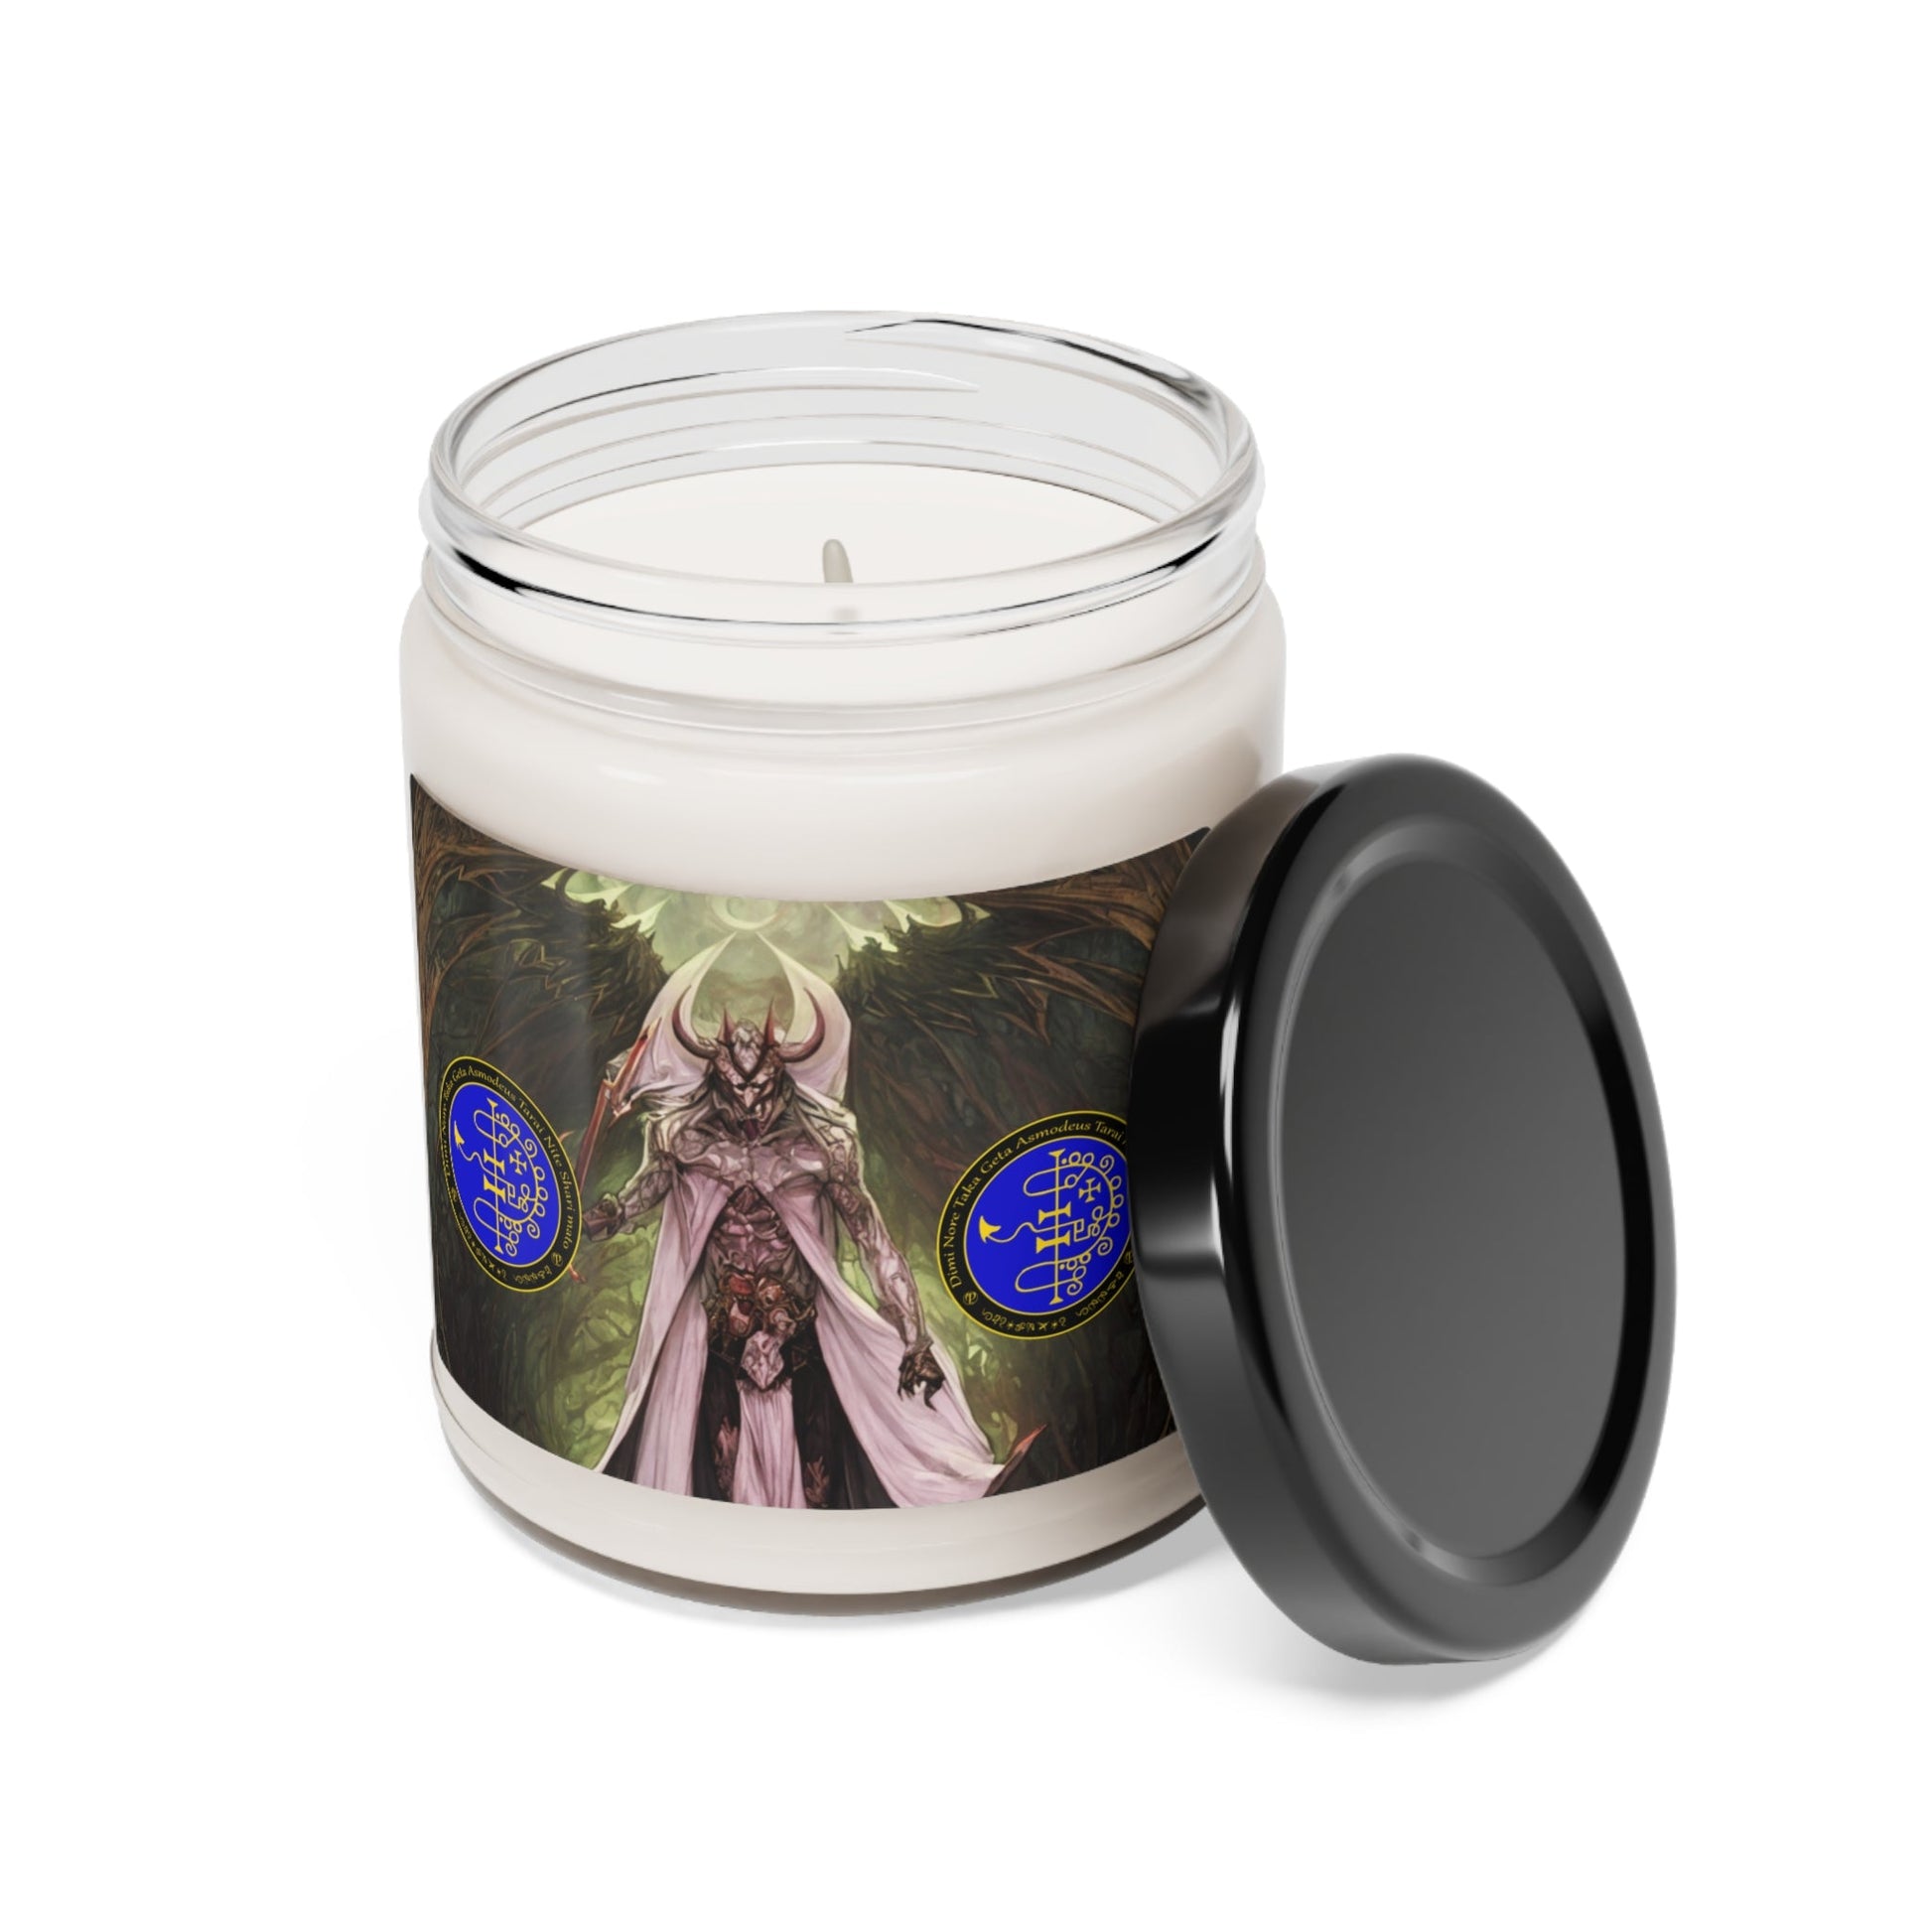 Demon-Asmodeus-Altar-Scented-Soy-Candle-for-Gambling-related-offerings-rituals-initiations-or-praying-and-meditation-17